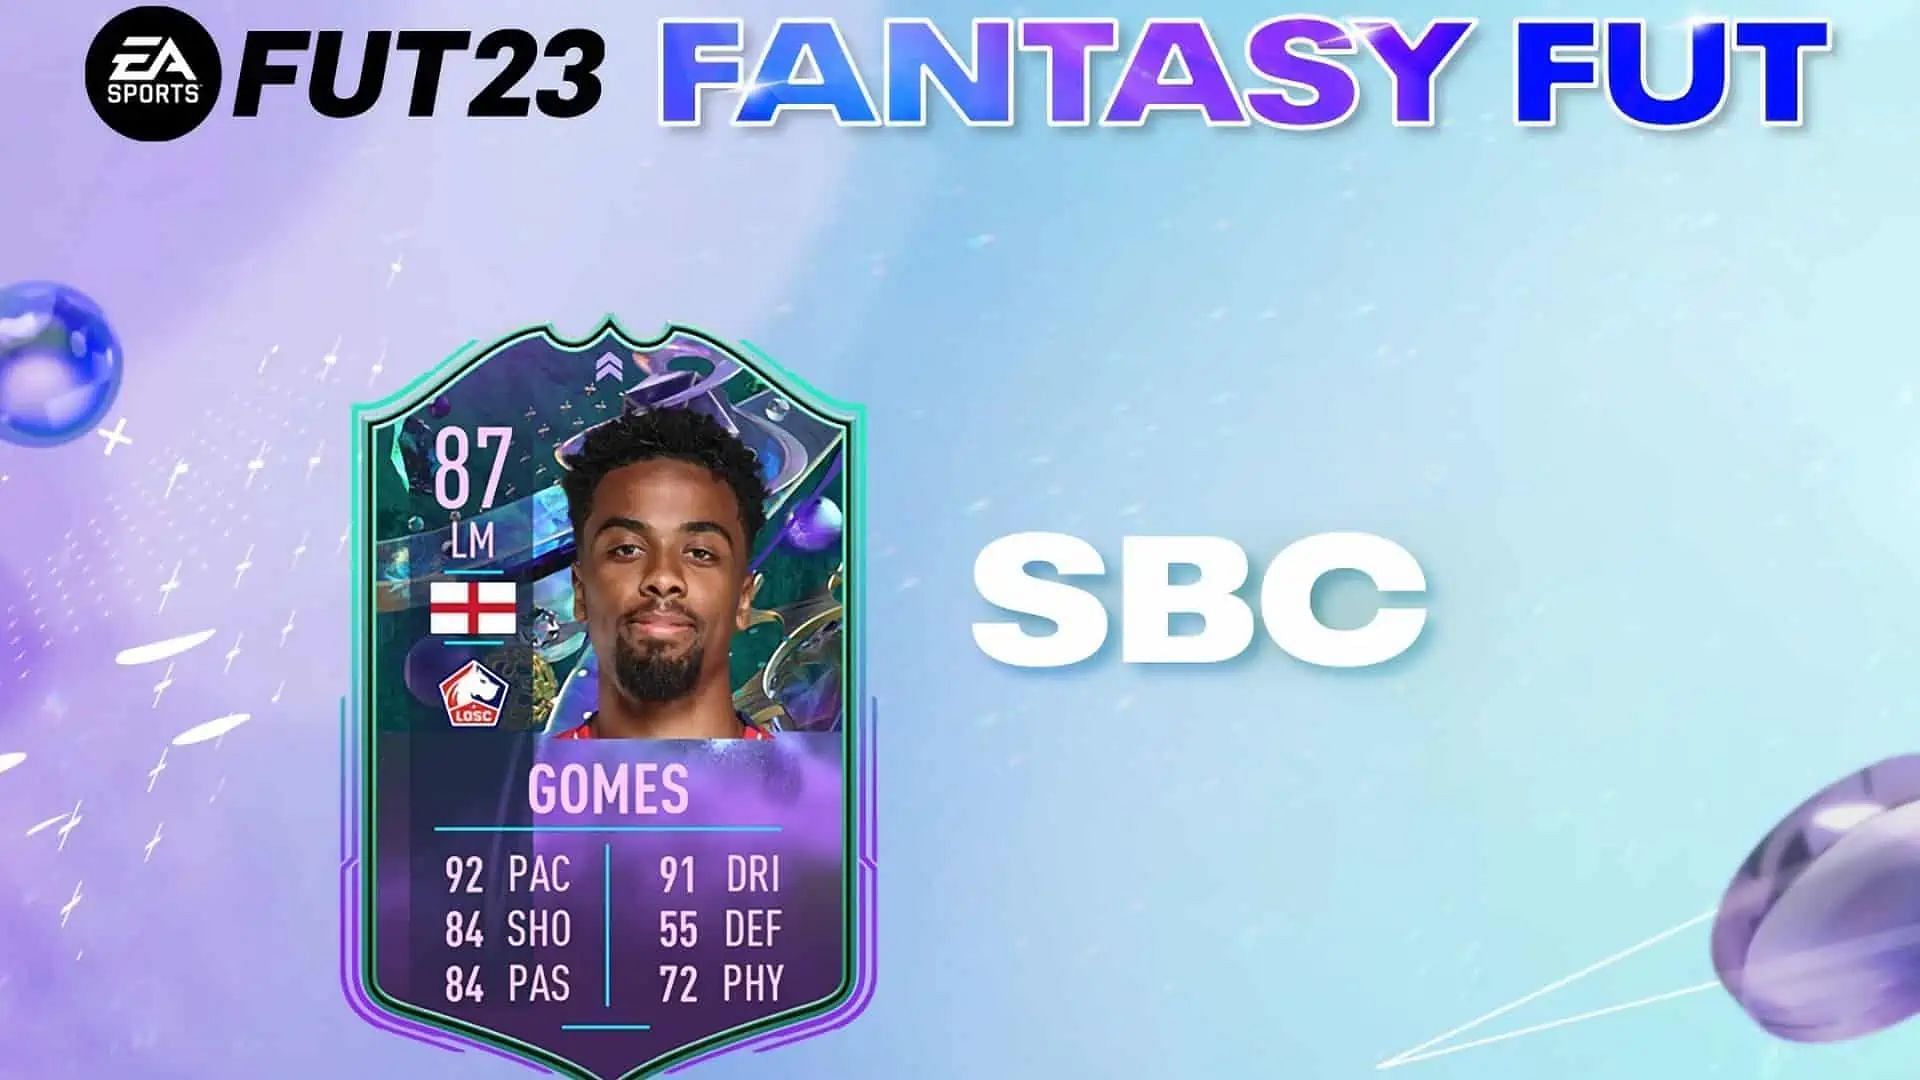 The Angel Gomes Fantasy FUT SBC could be quite useful for certain FIFA 23 players (Image via EA Sports)